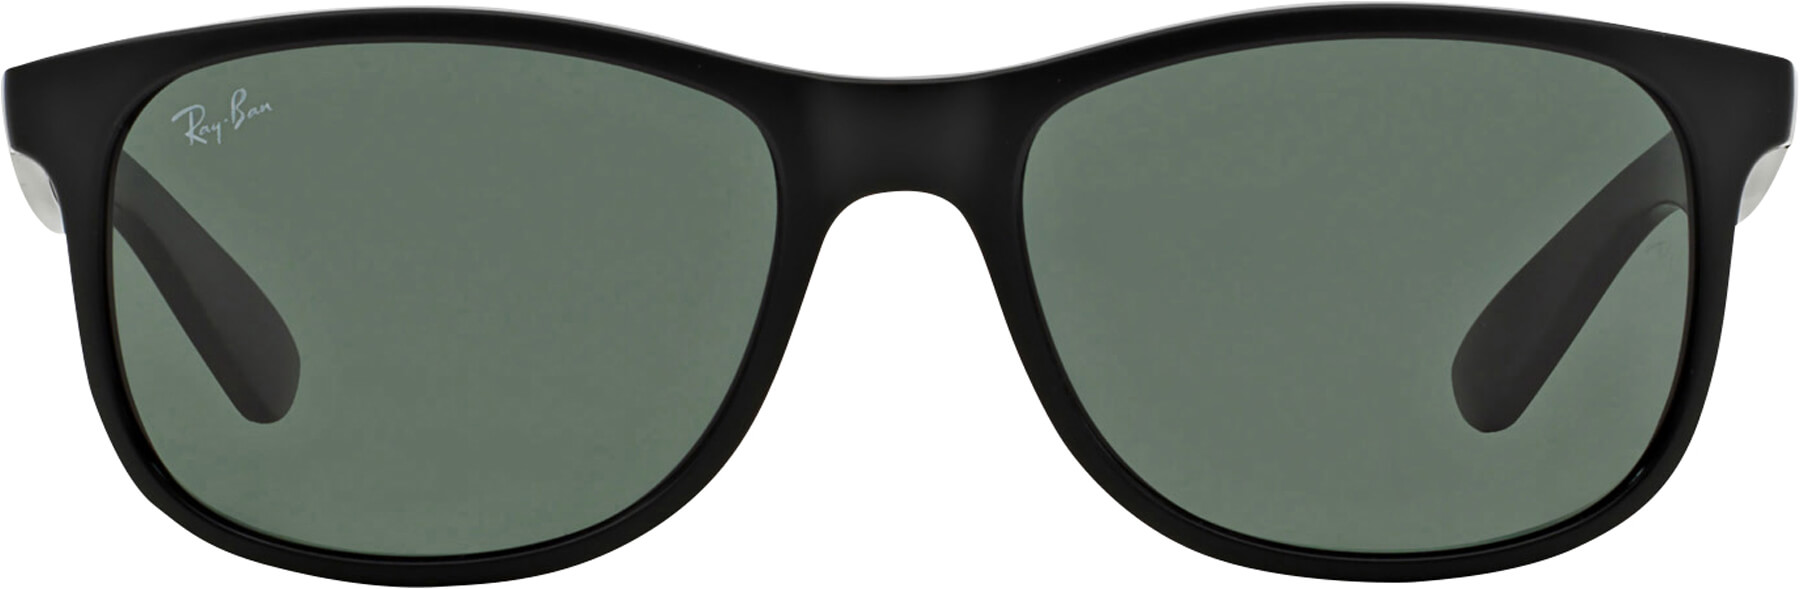 Ray-Ban ANDY 4202 image number null